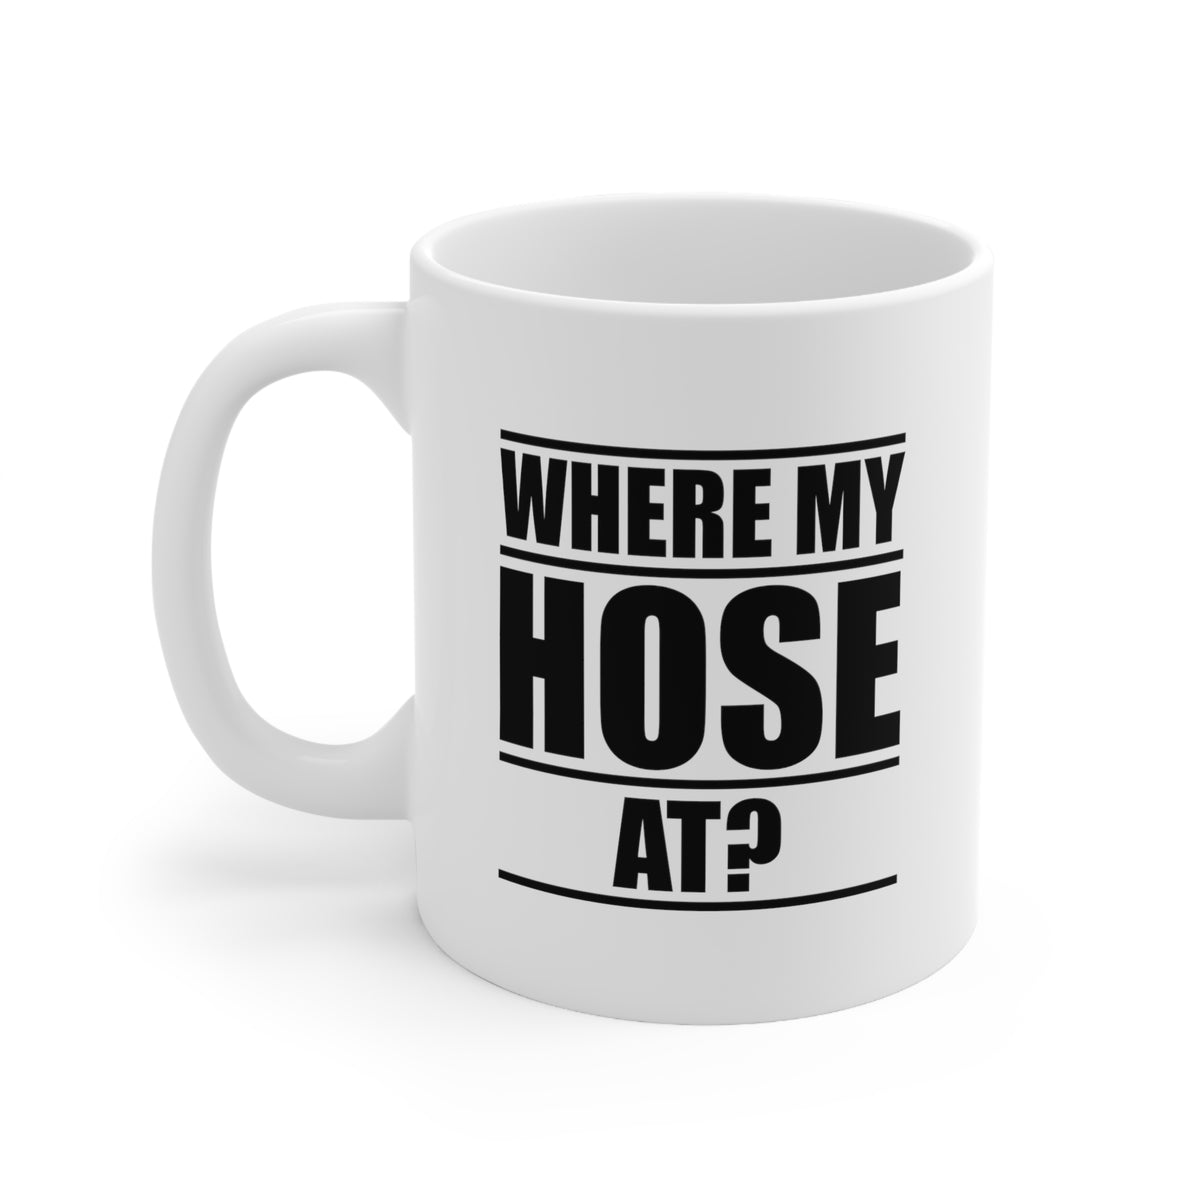 Where My Hose At? – Funny Coffee Mug For Firefighter